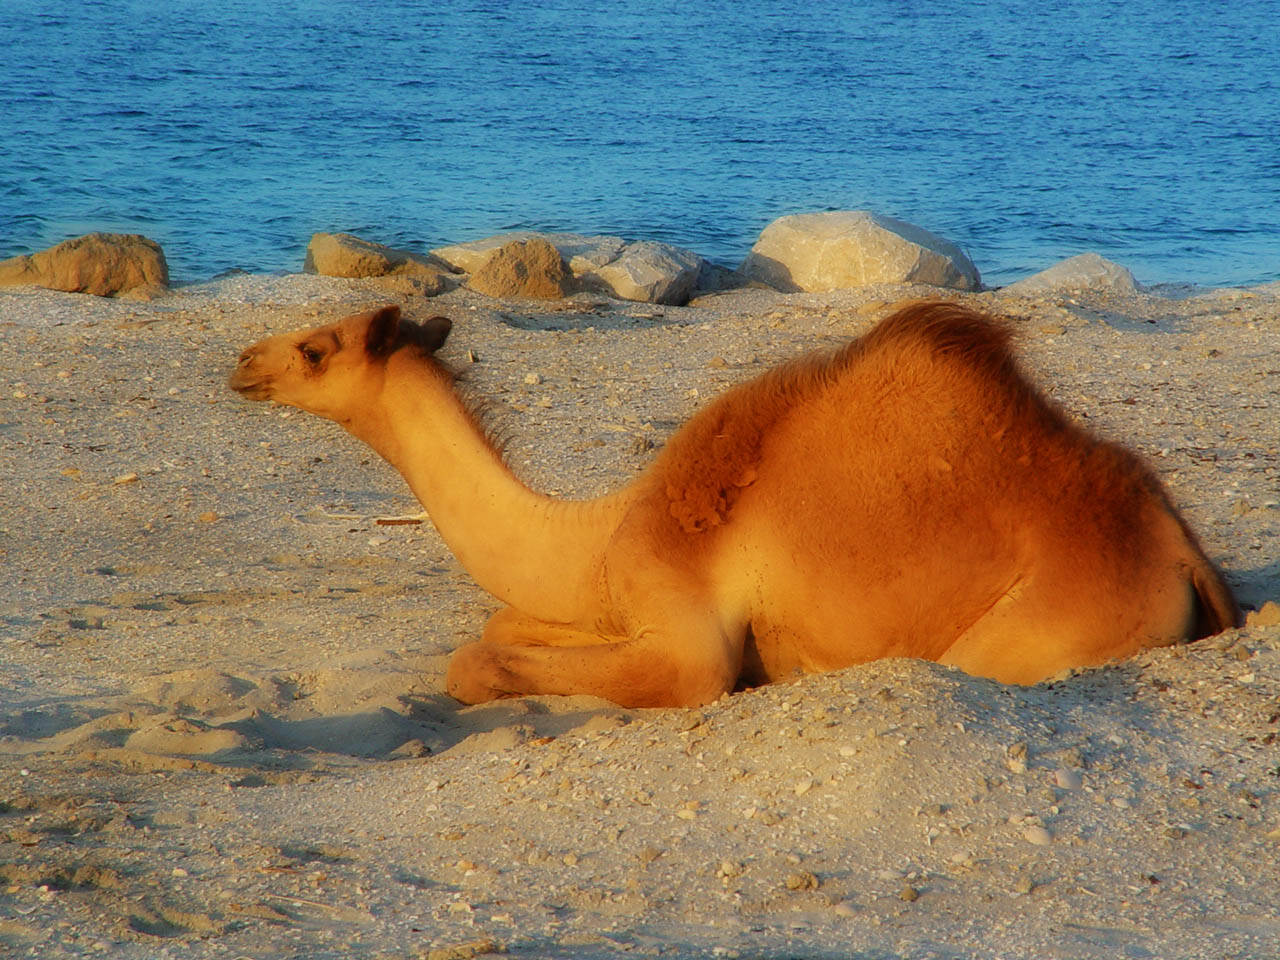 a camel lies in the sand near the water